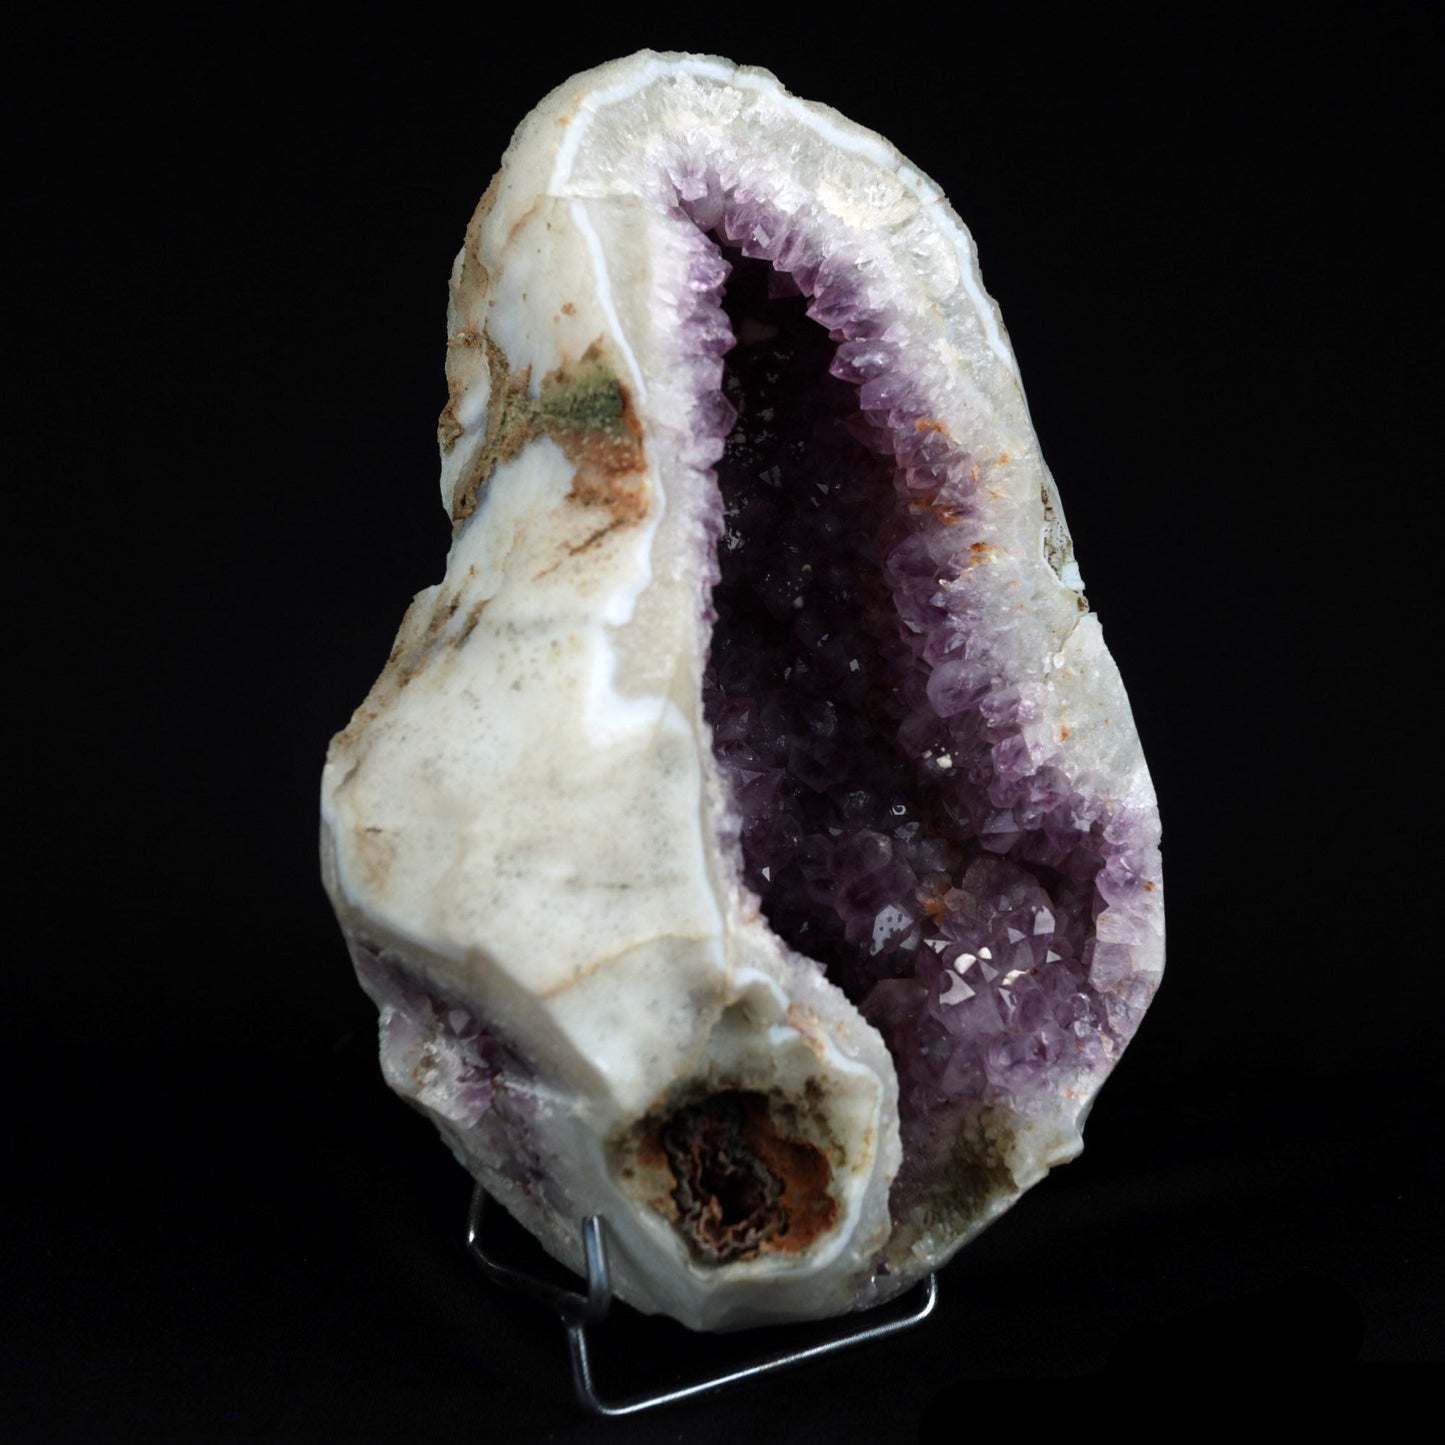 Amethyst Sparkling Geode (repaired) Natural Mineral Specimen # B 4922  https://www.superbminerals.us/products/amethyst-sparkling-geode-repaired-natural-mineral-specimen-b-4922  Features: A Geode decorated with rich purple Amethyst Quartz crystals that are translucent. The rich purple of amethyst is unlike any other gemstone, and this piece is no exception. Aesthetic, with wonderful colour and sheen, and at an affordable price. It's in good condition. Primary Mineral(s): Amethyst